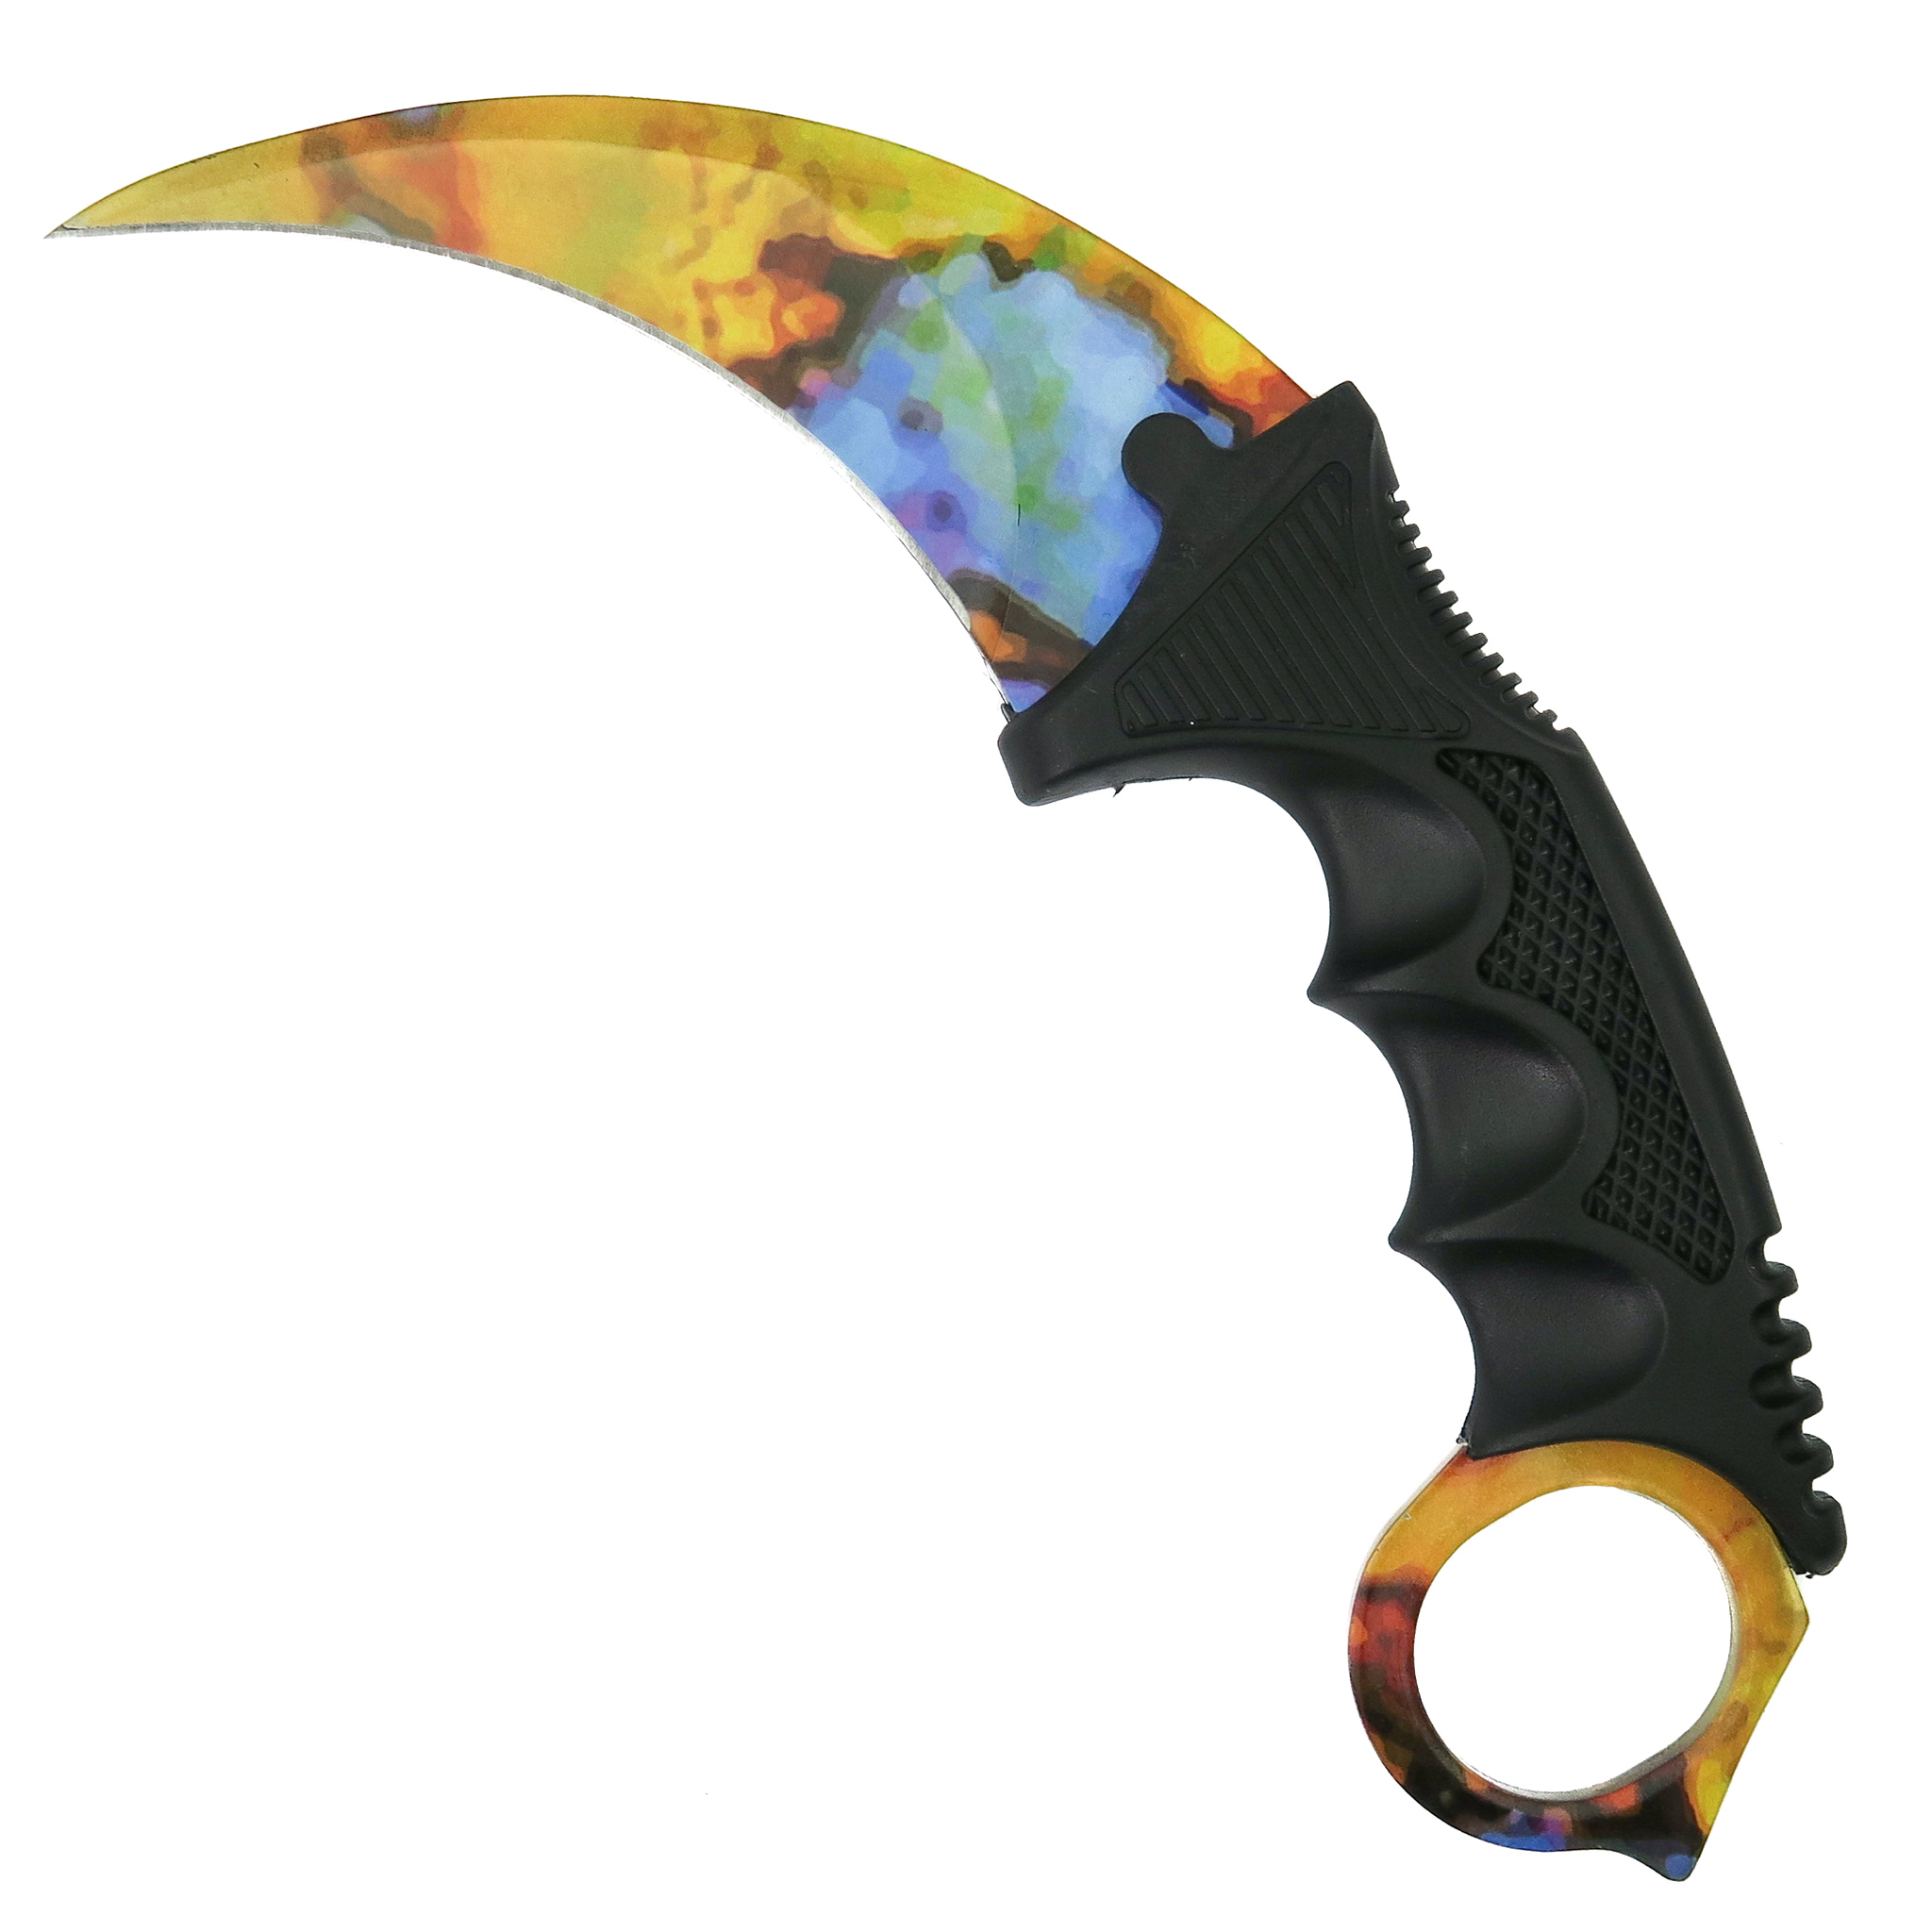 The Archimedes Claw Karambit, Yellow, Blue Mix Blade